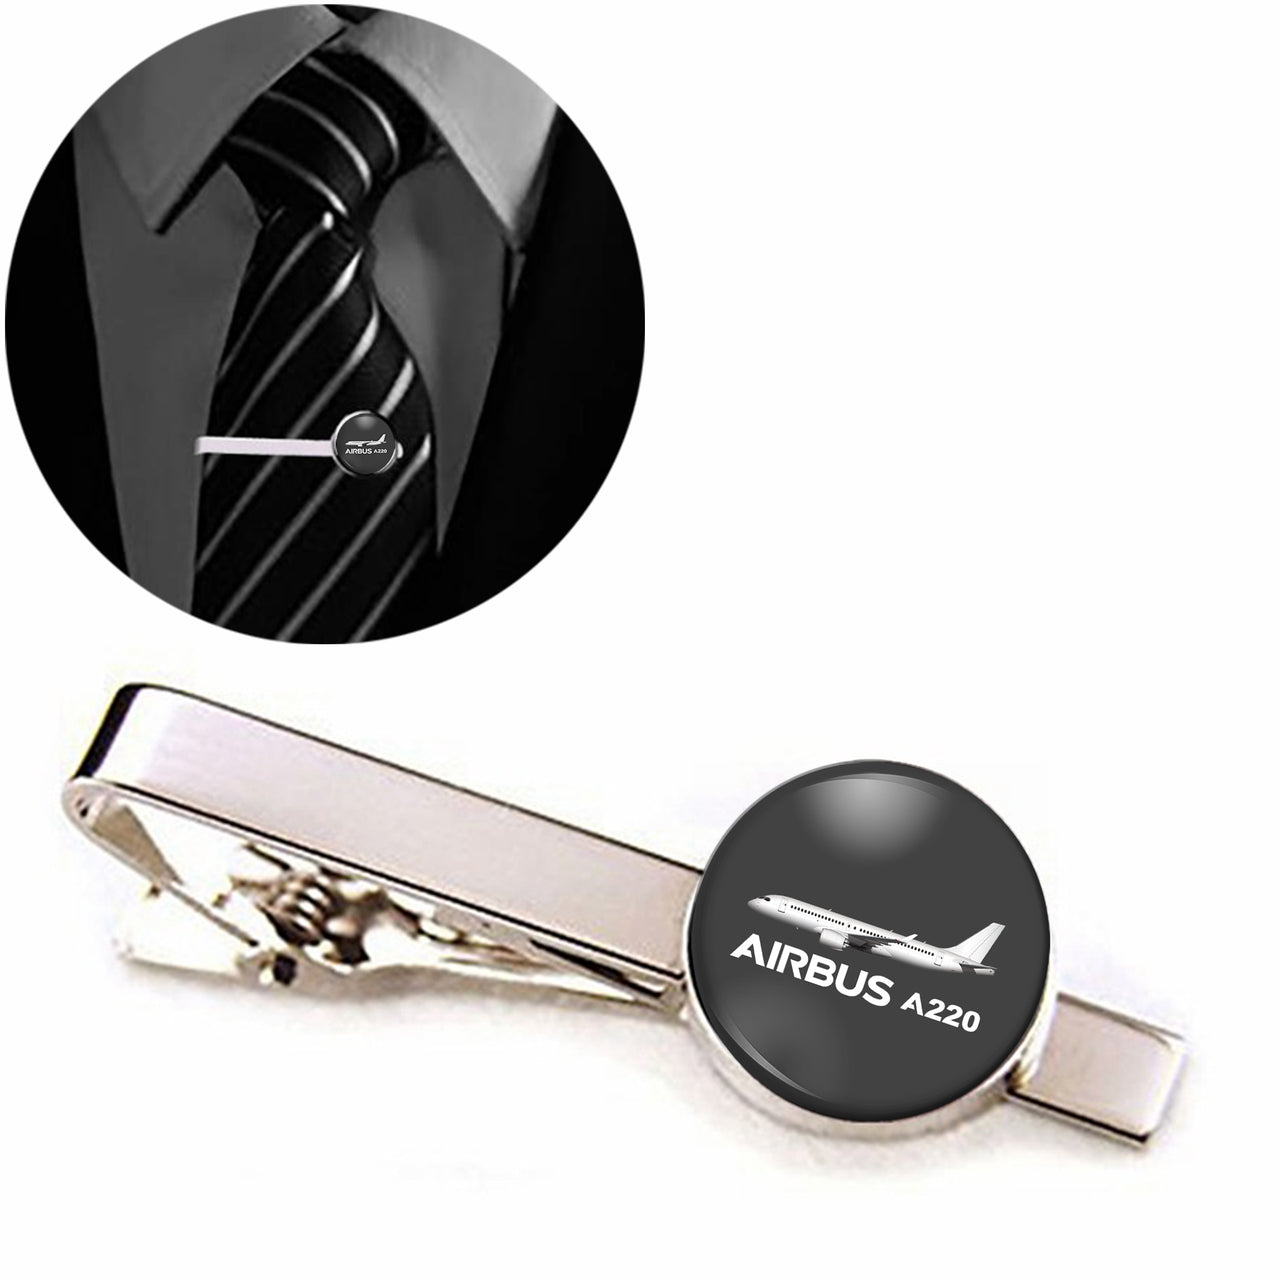 The Airbus A220 Designed Tie Clips